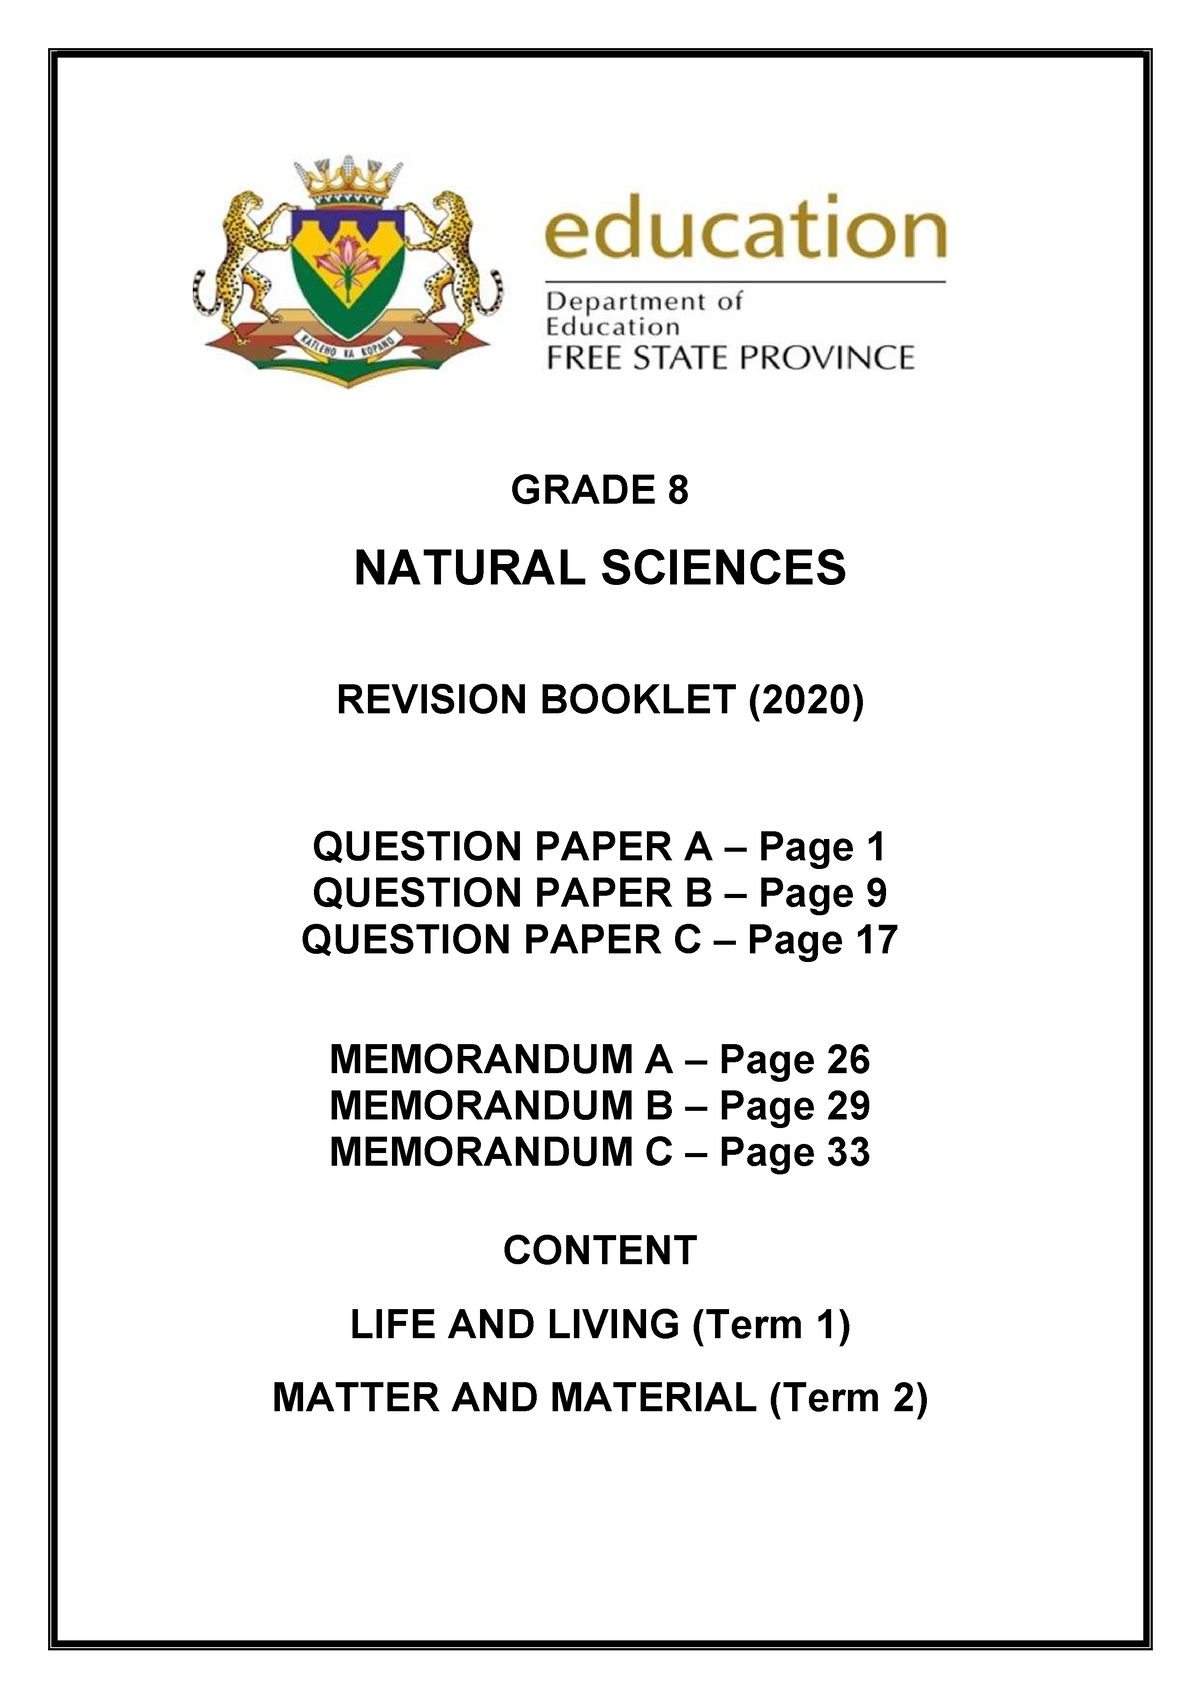 research paper about natural sciences